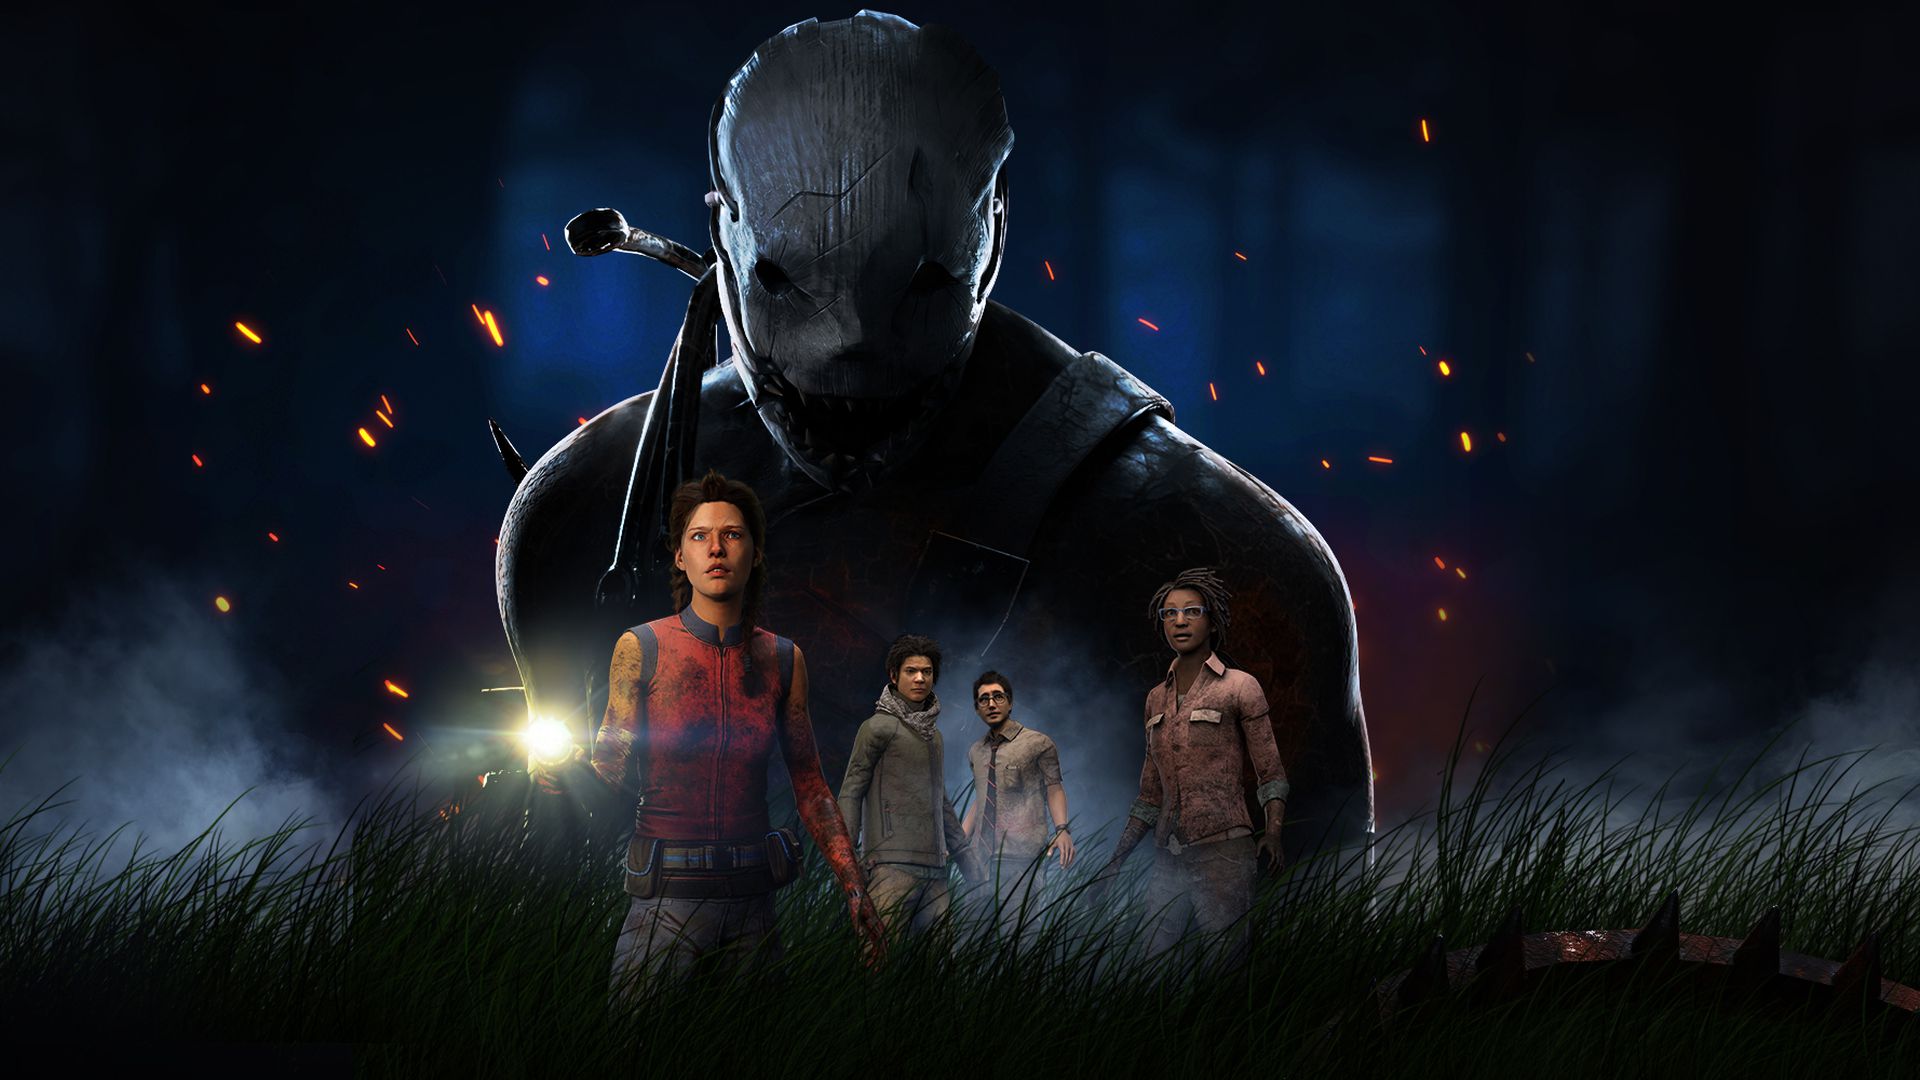 Dead by Daylight (DBD) Crossplay: How to Play With Friends